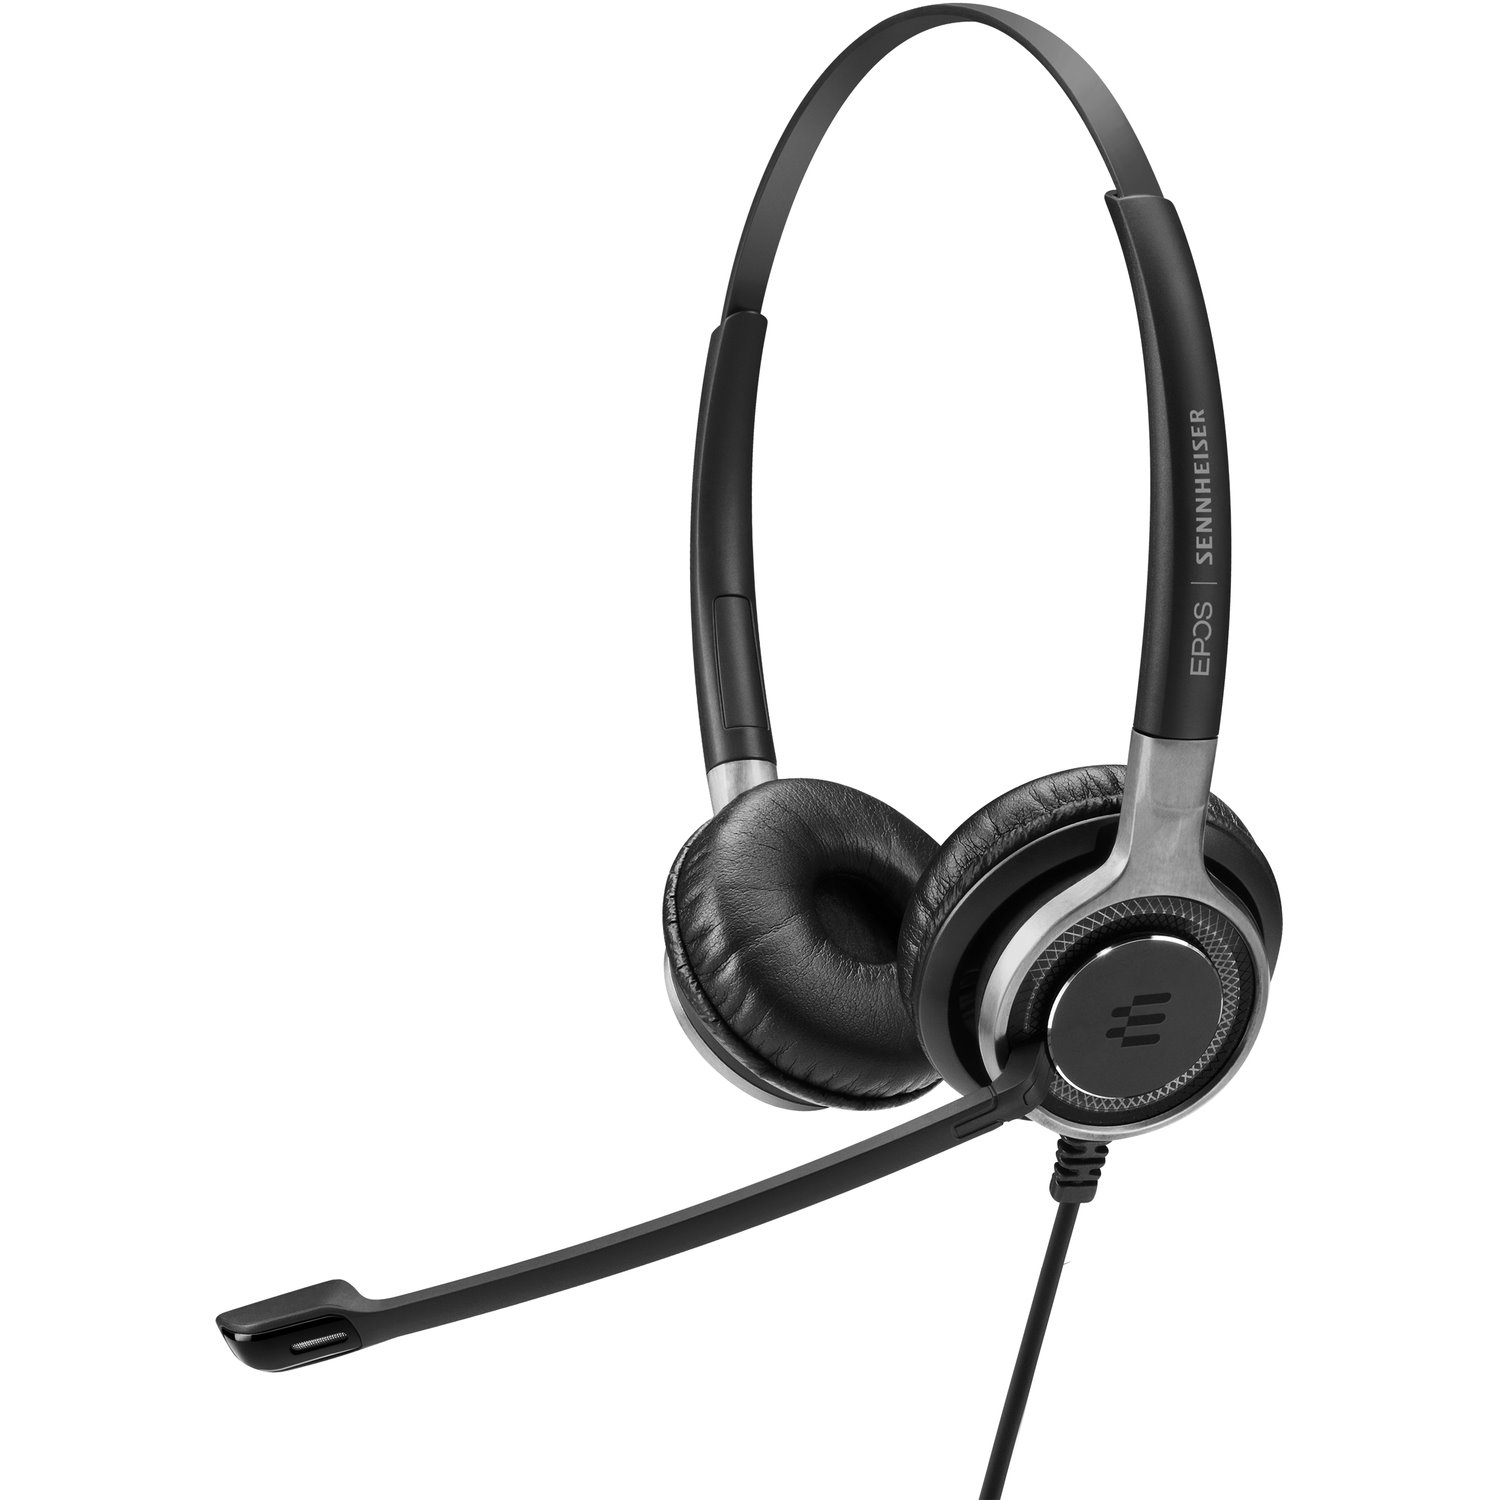 EPOS IMPACT SC 662 Wired On-ear Stereo Headset - Black